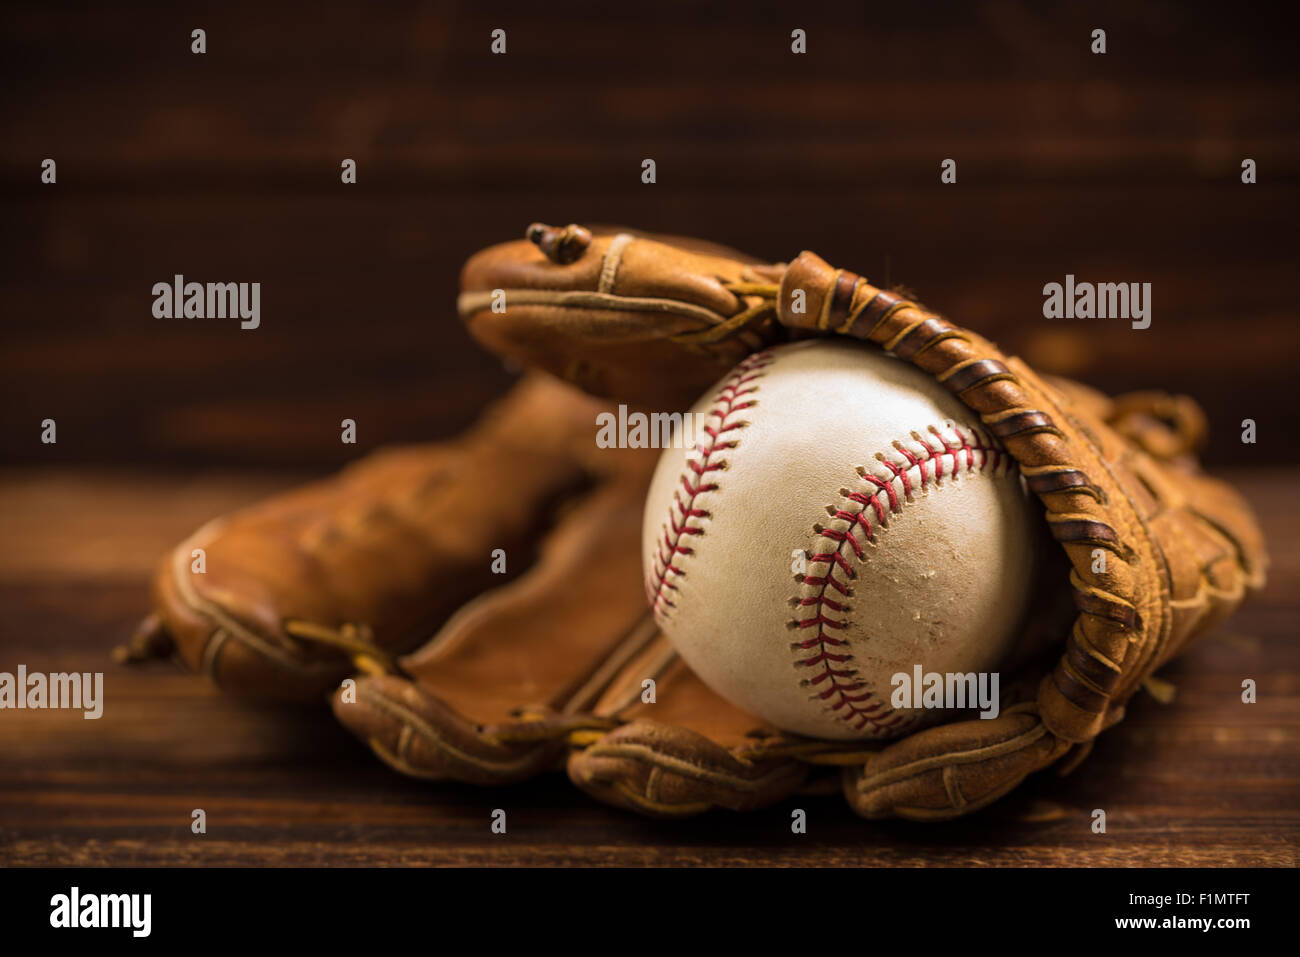 Brown leather baseball glove on a wooden bench Stock Photo